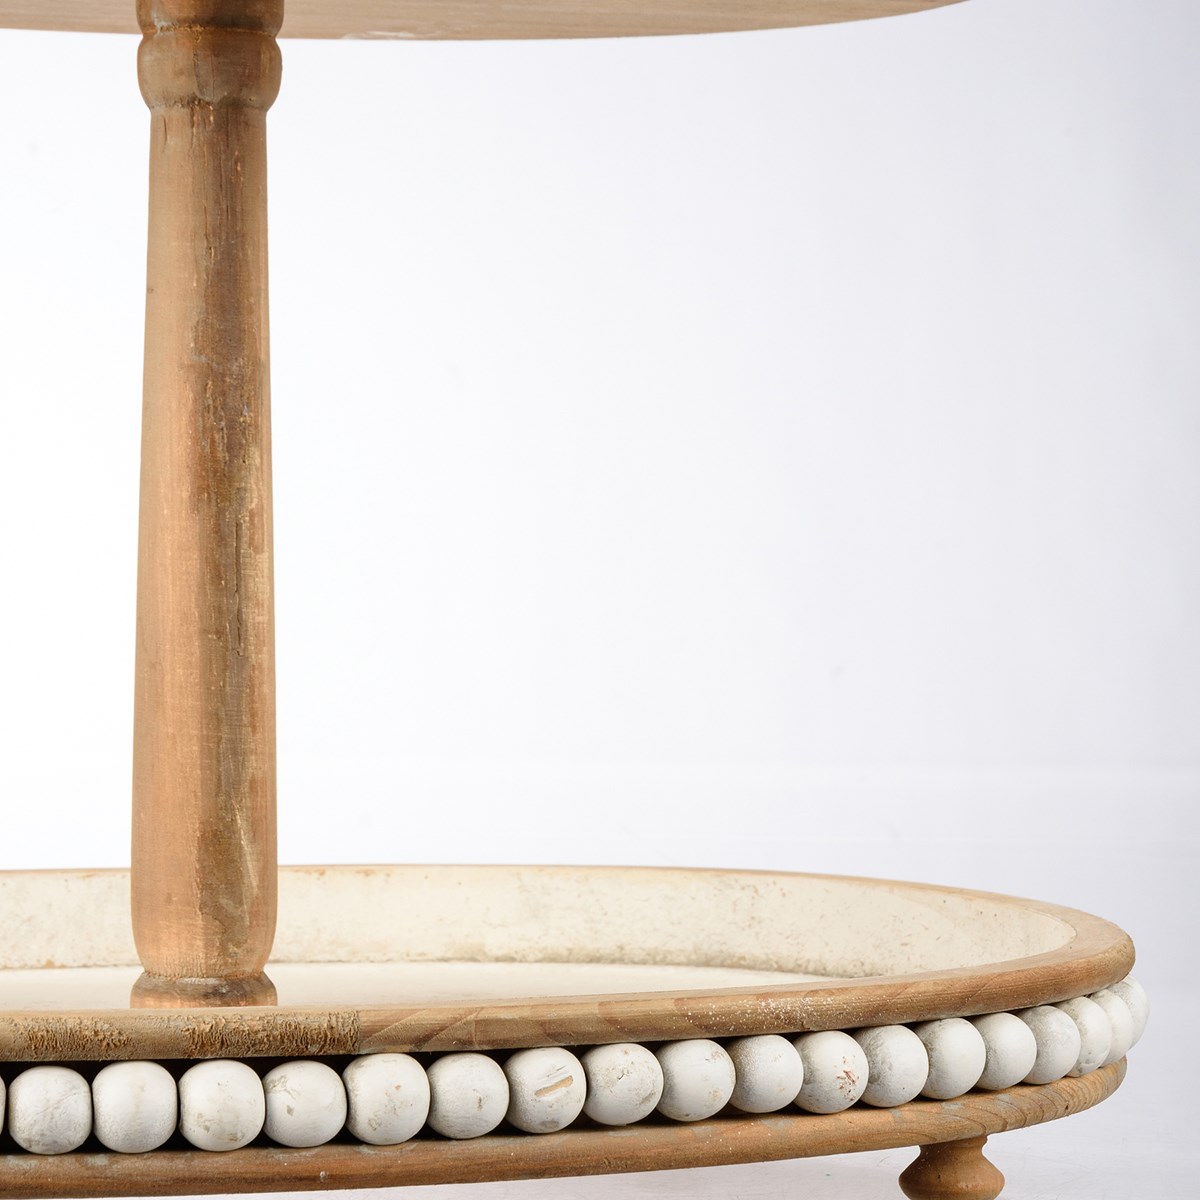 Three Tiered White Oval Tray - Wood, Metal